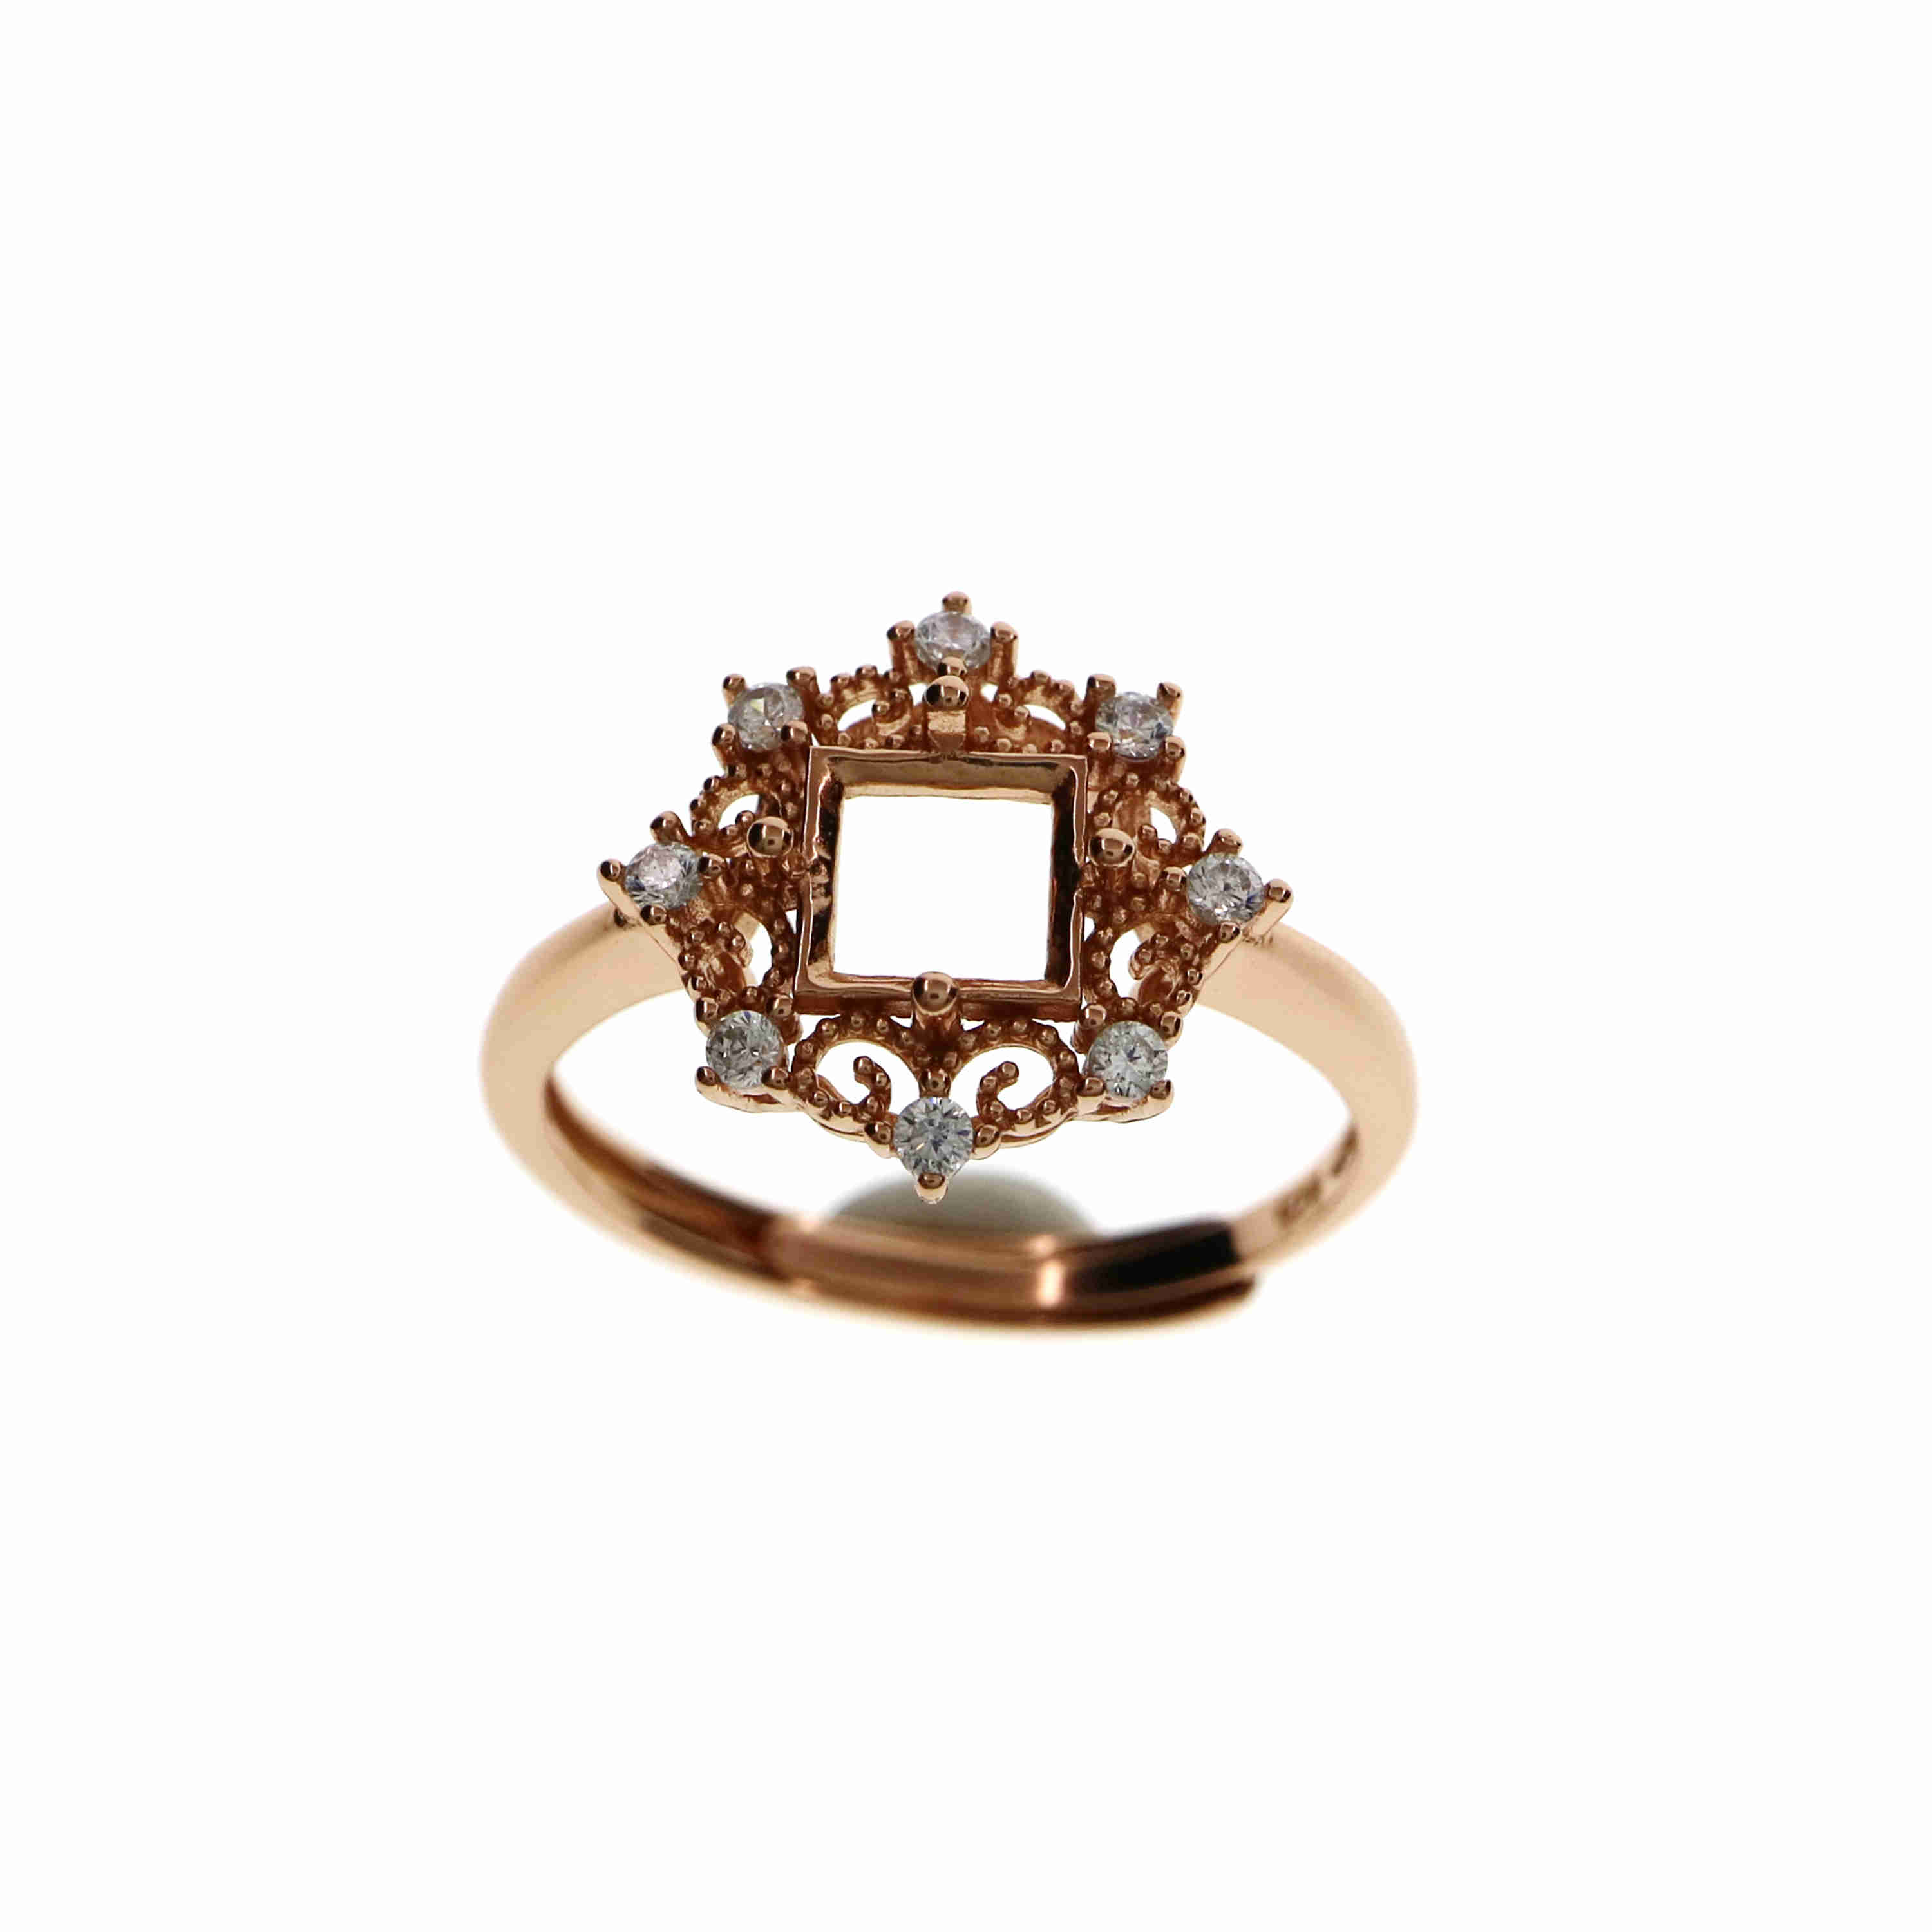 1Pcs 3-6MM Square Lace Rose Gold Silver Gems Cz Stone Prong Bezel Solid 925 Sterling Silver Adjustable Ring Settings 1294129 - Click Image to Close